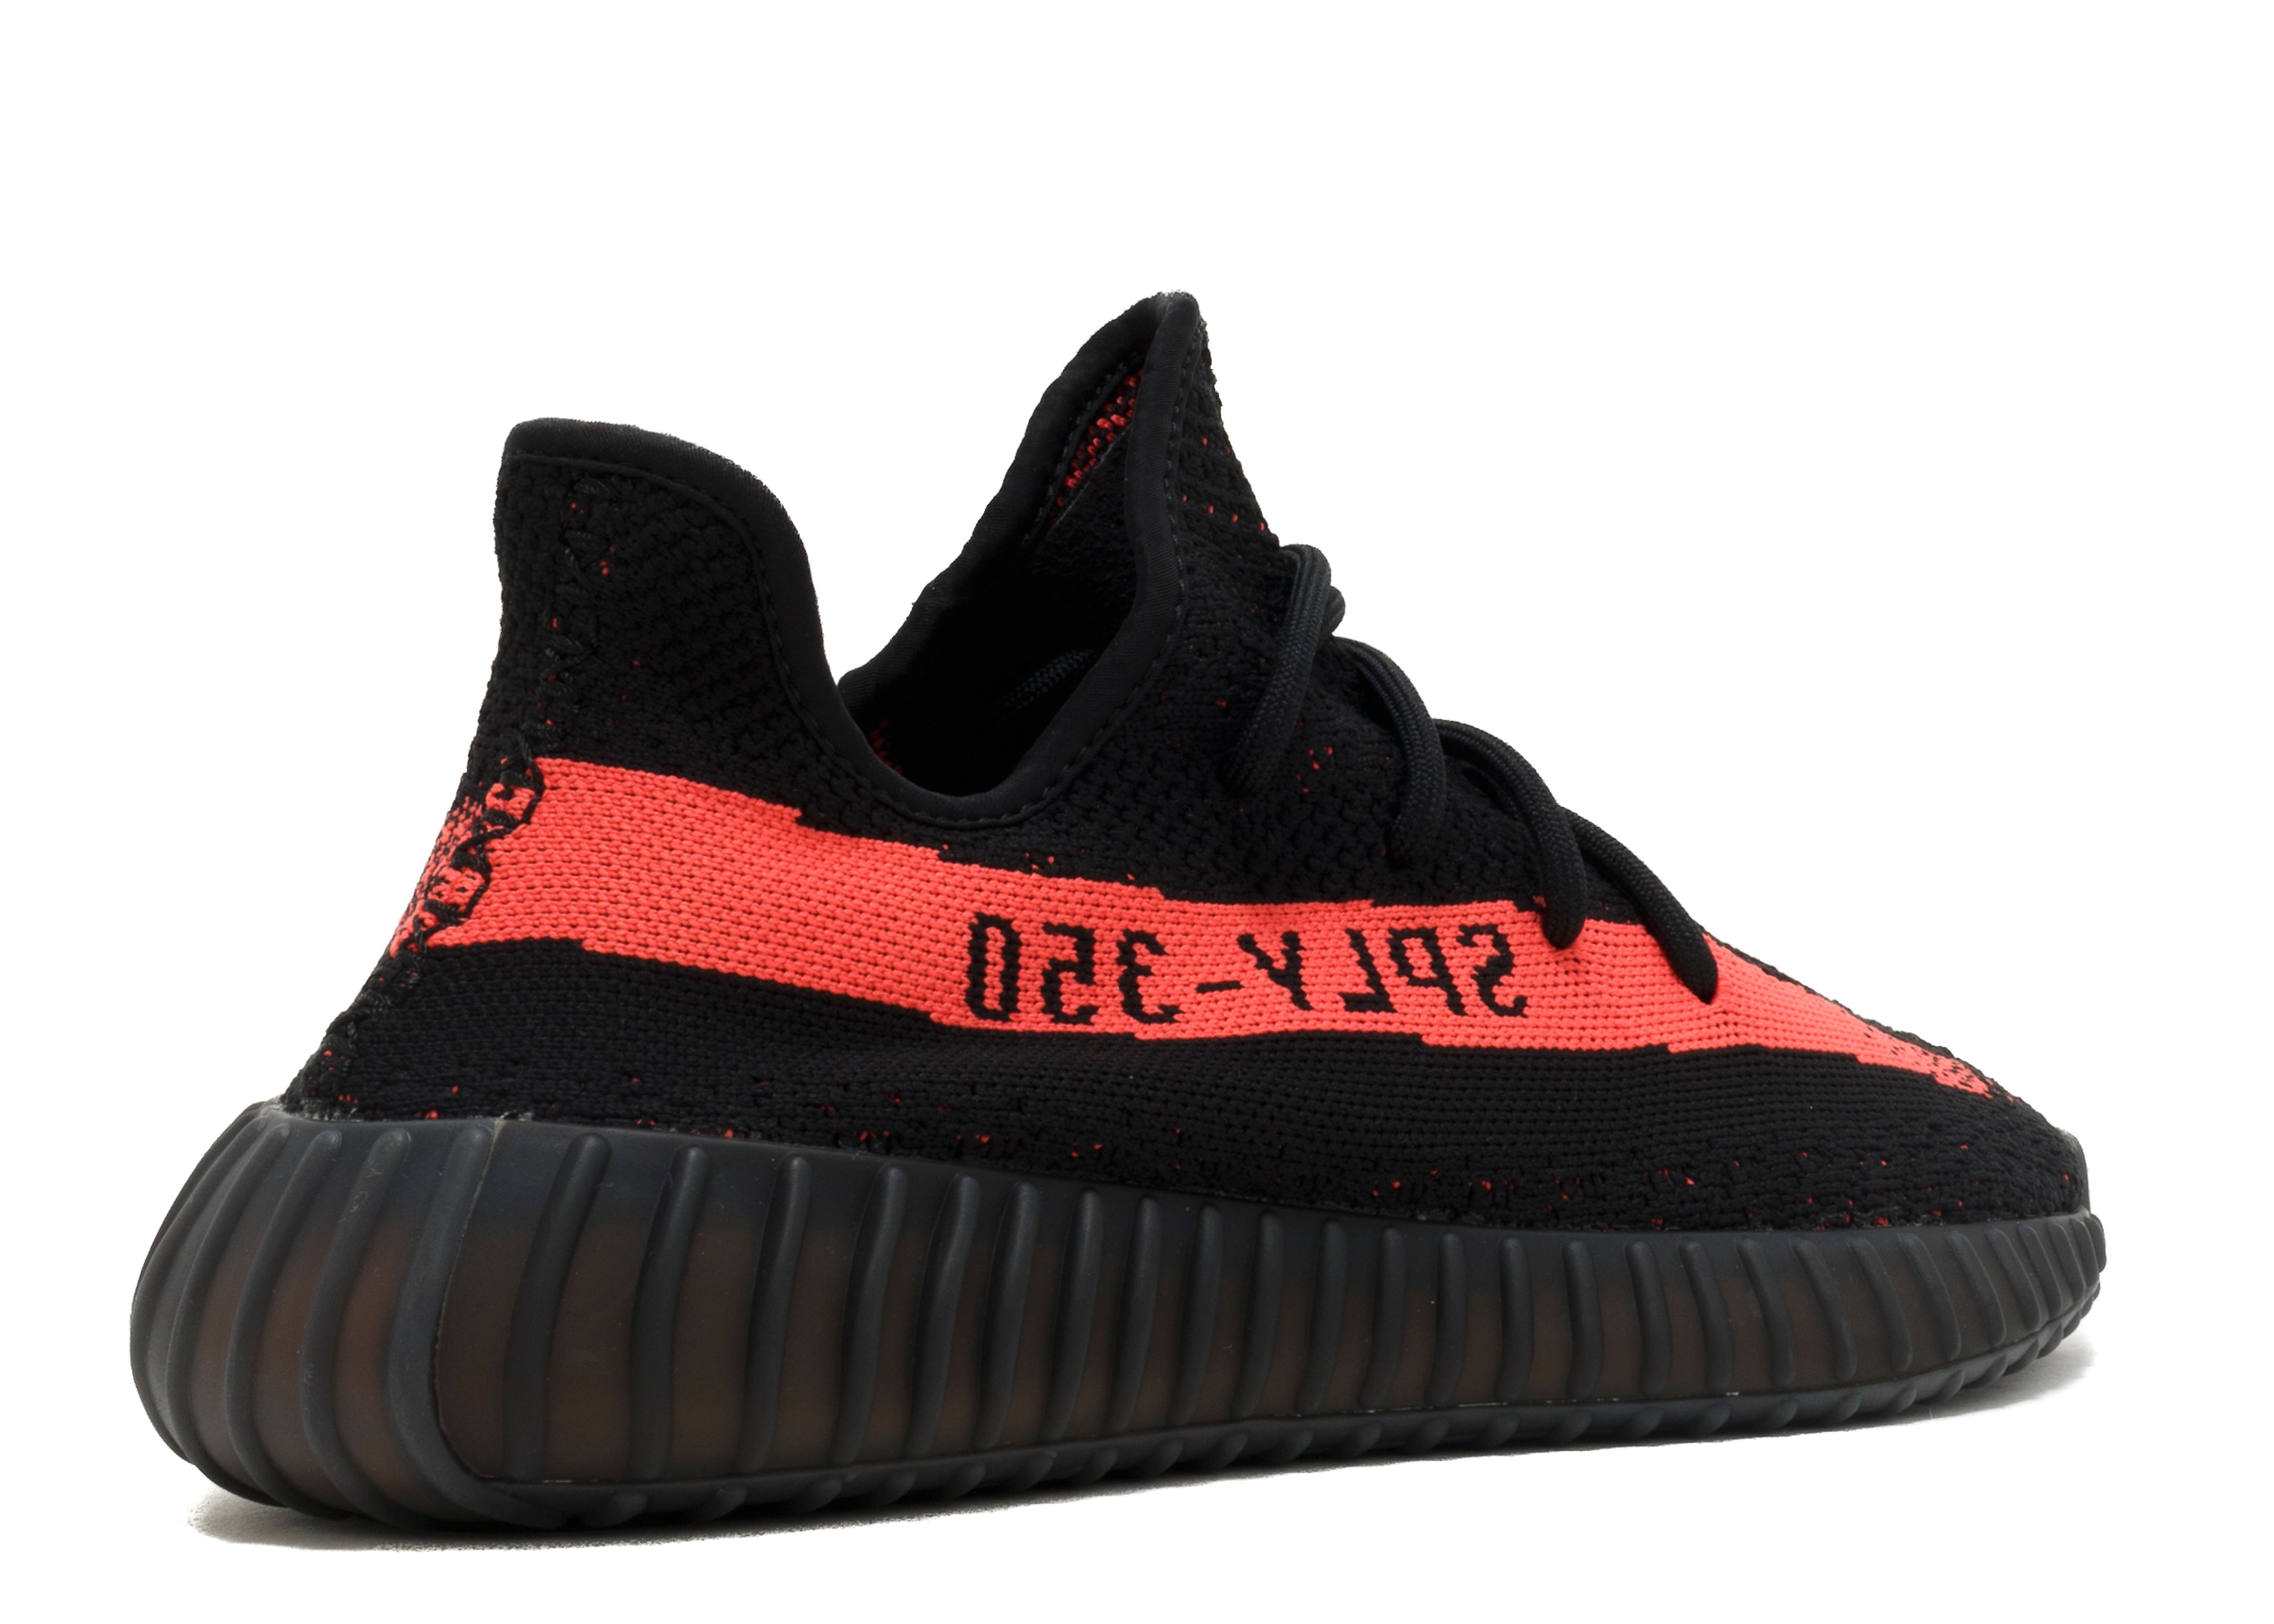 Mens Adidas Yeezy 350 Boost v2 Core Black Red Size 13